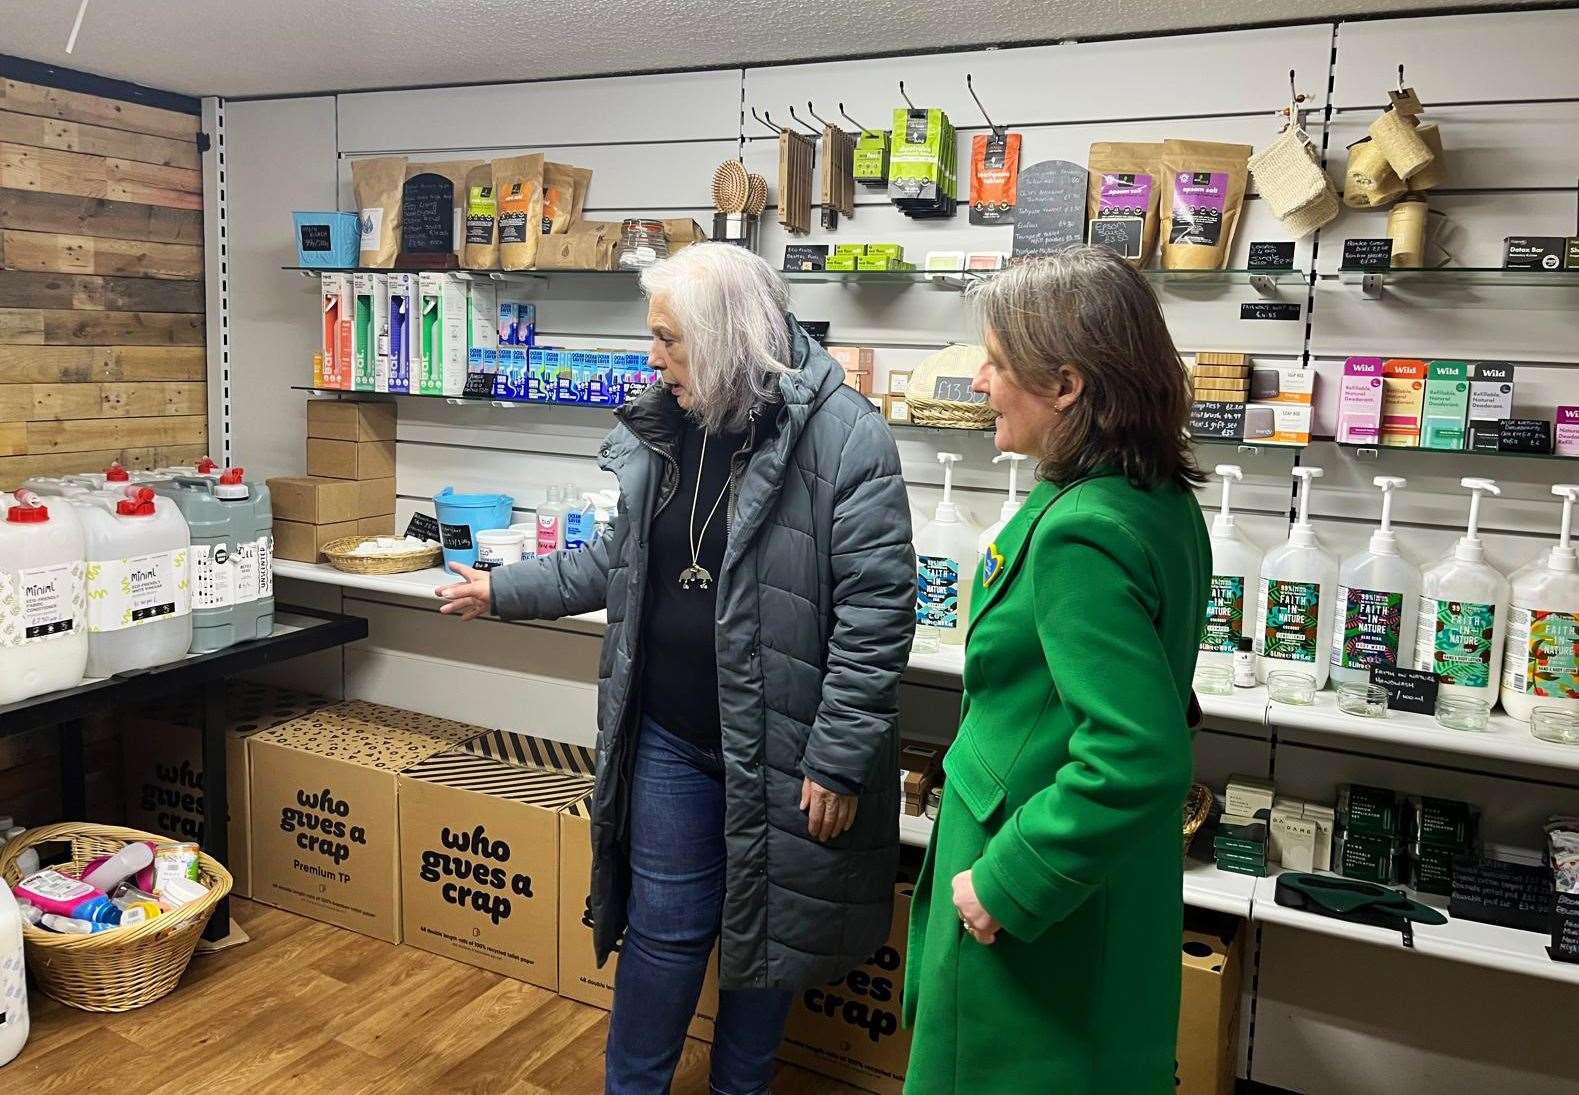 Helen Allan (left) showing Maree Todd the Socially Growing refill shop, one of Thurso Community Development Trust's projects.